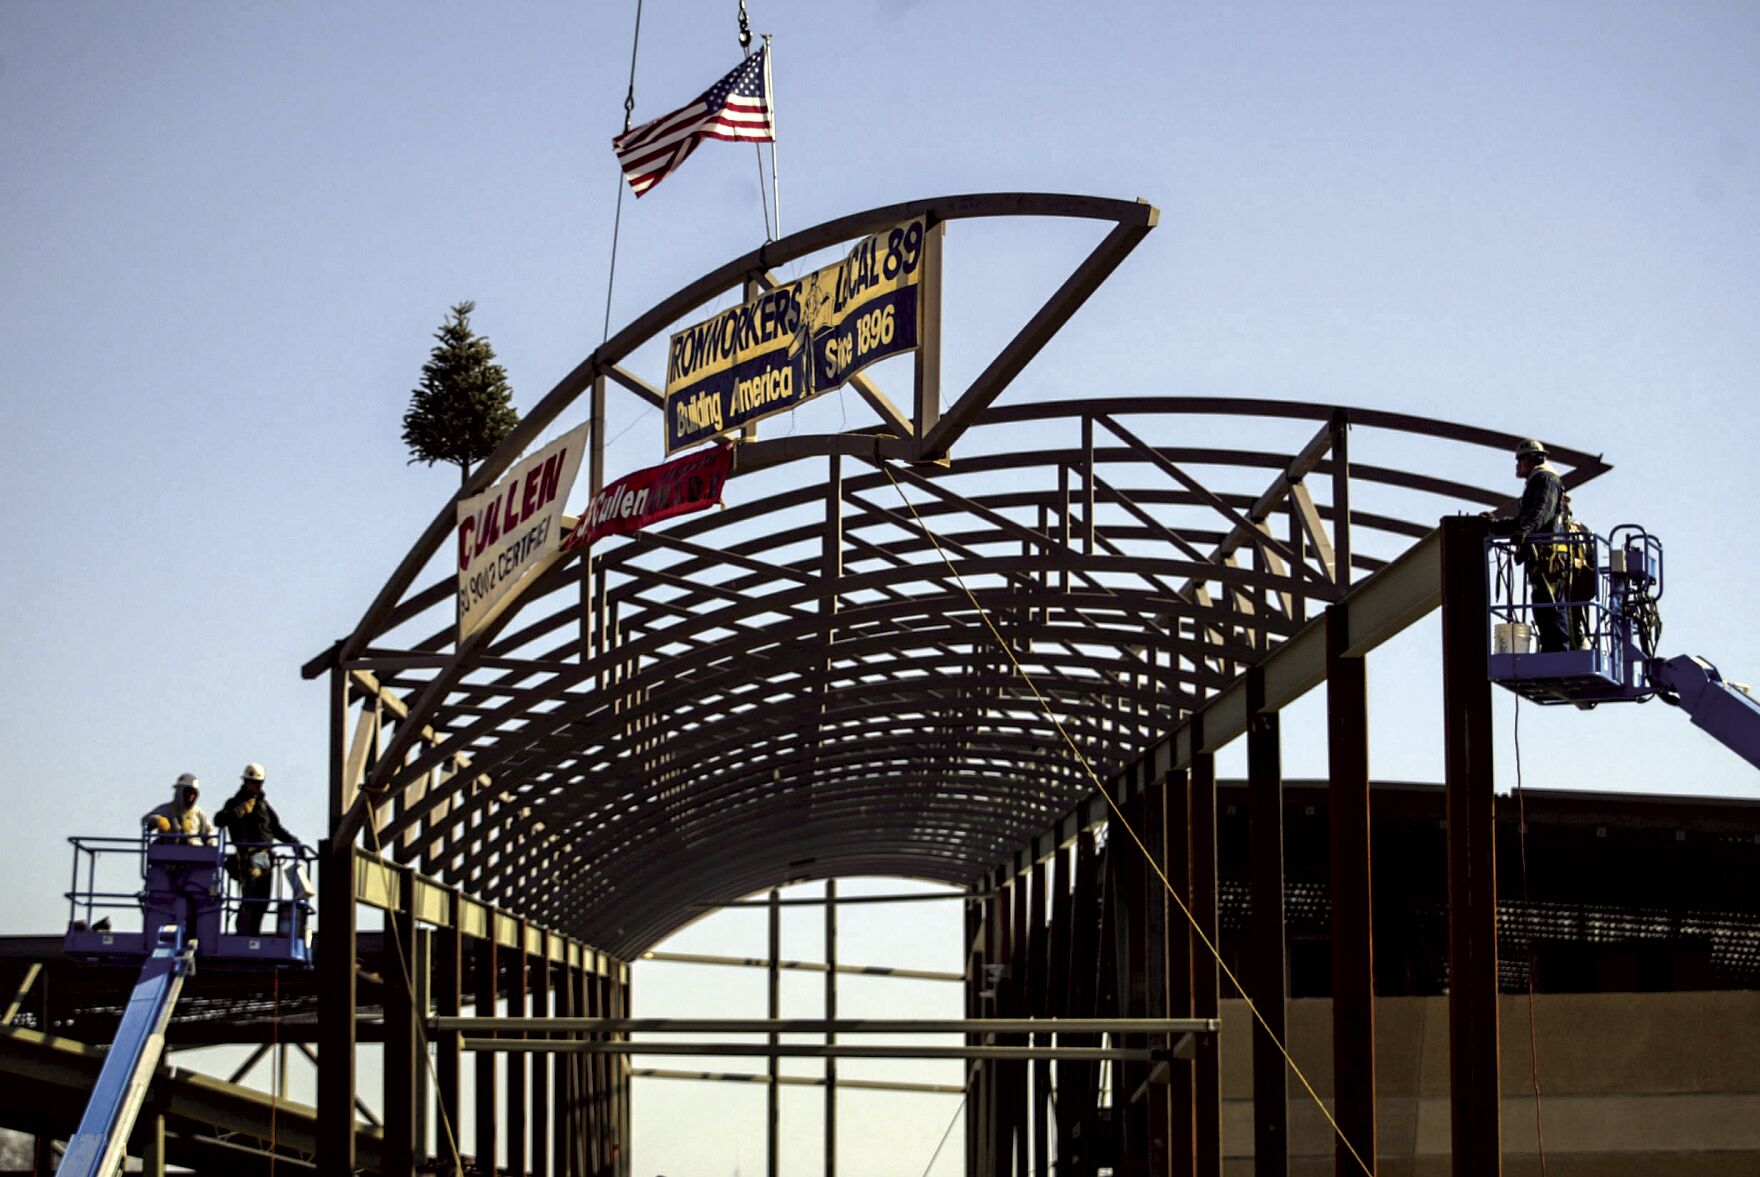 The final piece of structural steel is installed on the Grand River Center in Dubuque during a topping out ceremony in 2003.    PHOTO CREDIT: CLINT AUSTIN